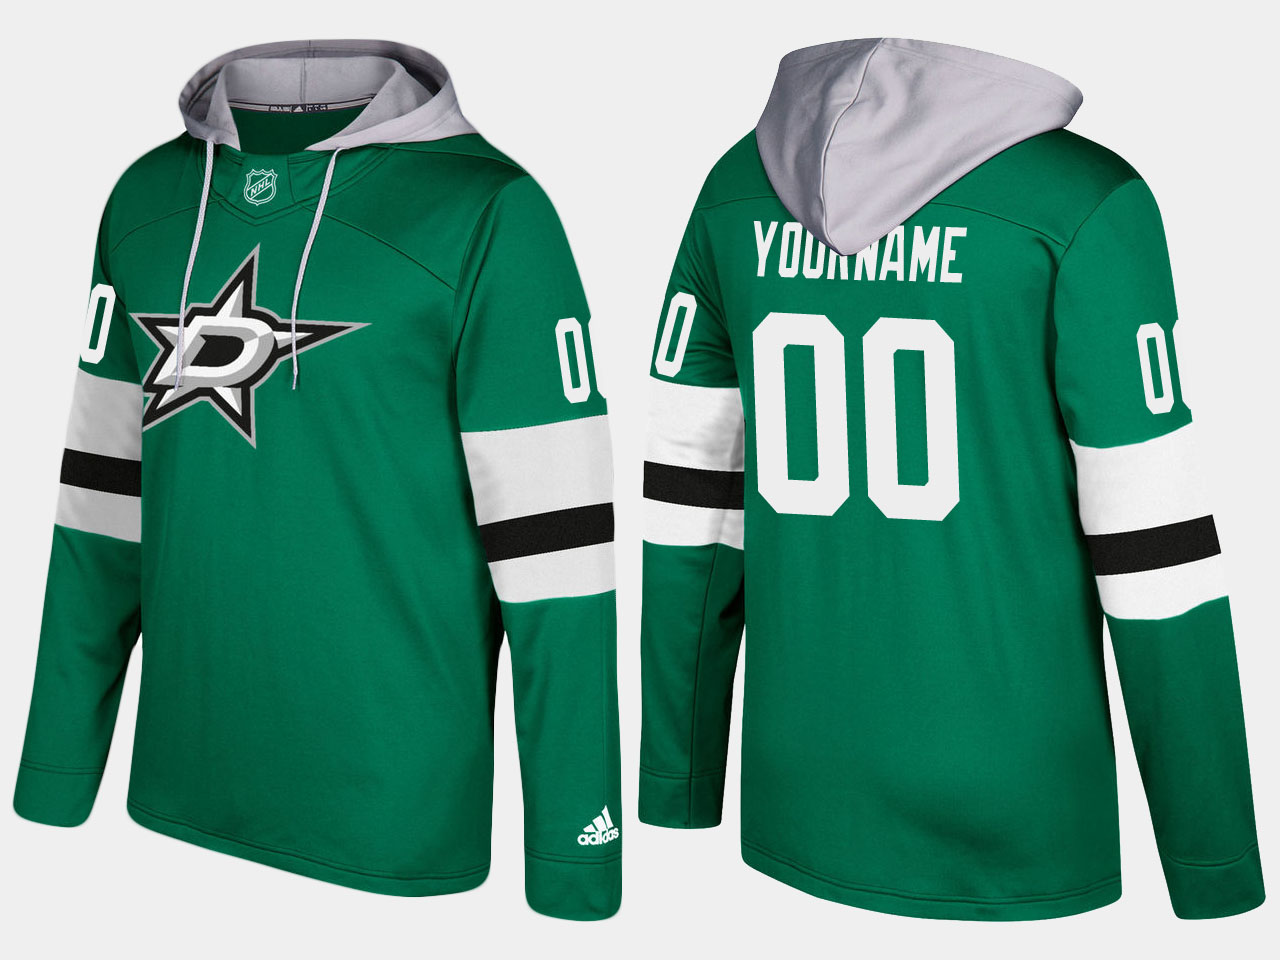 Nike Stars Men's Customized Name And Number Green Hoodie